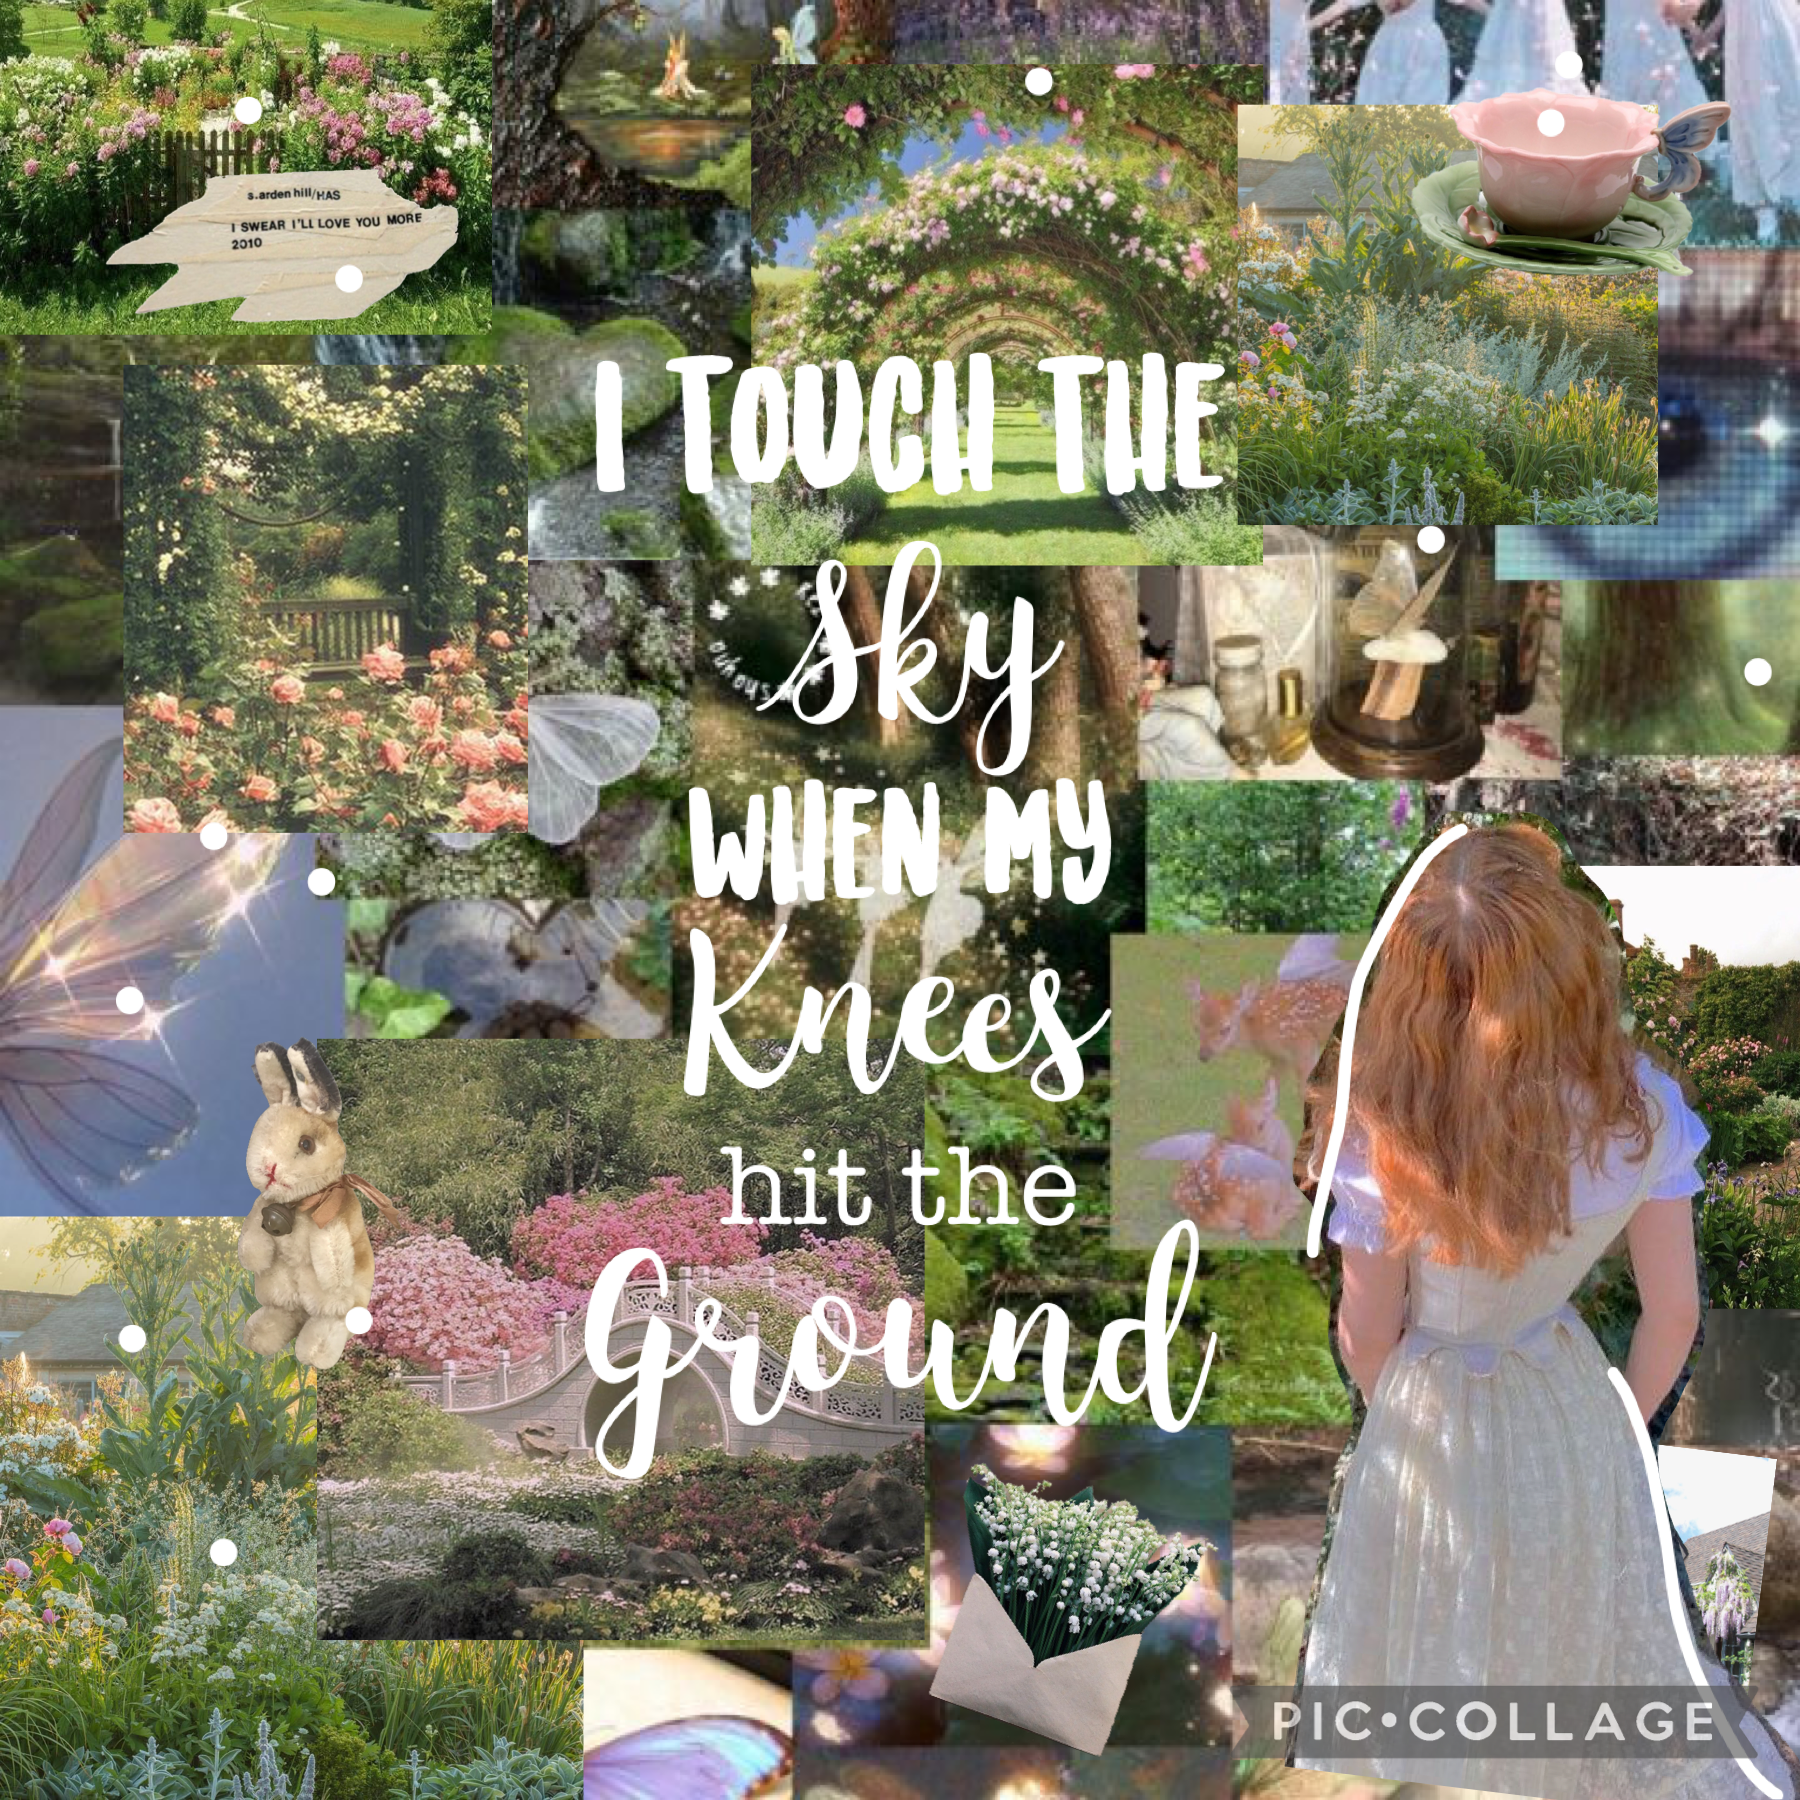 🌸 Apr 6 2022 🌸
This collage is simple and gardencore inspired. Sadly I have lost my old style experimenting with new ones! :)